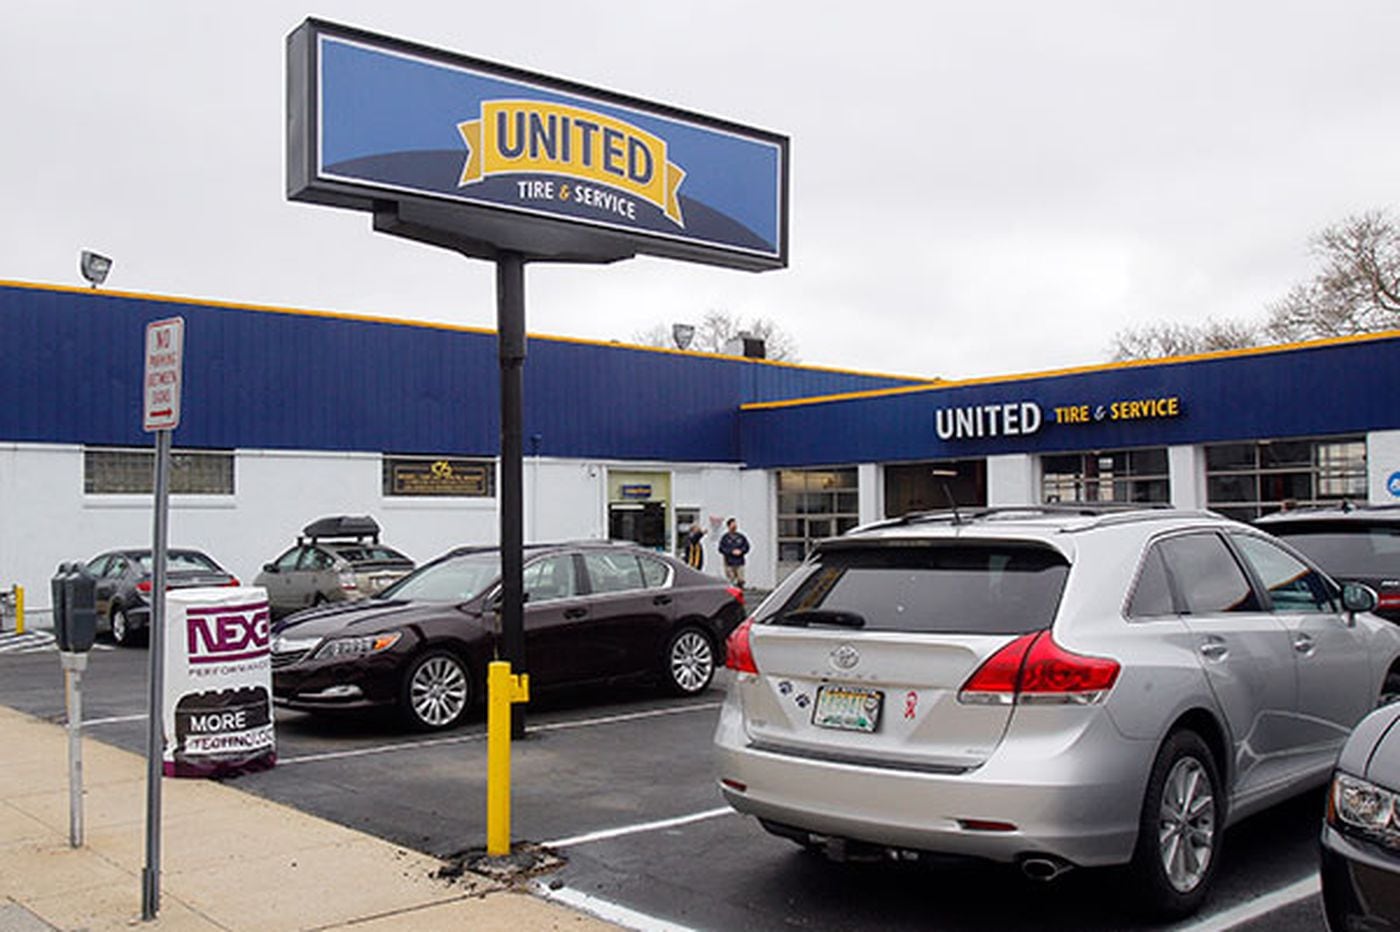 17 small tire shops now stand United